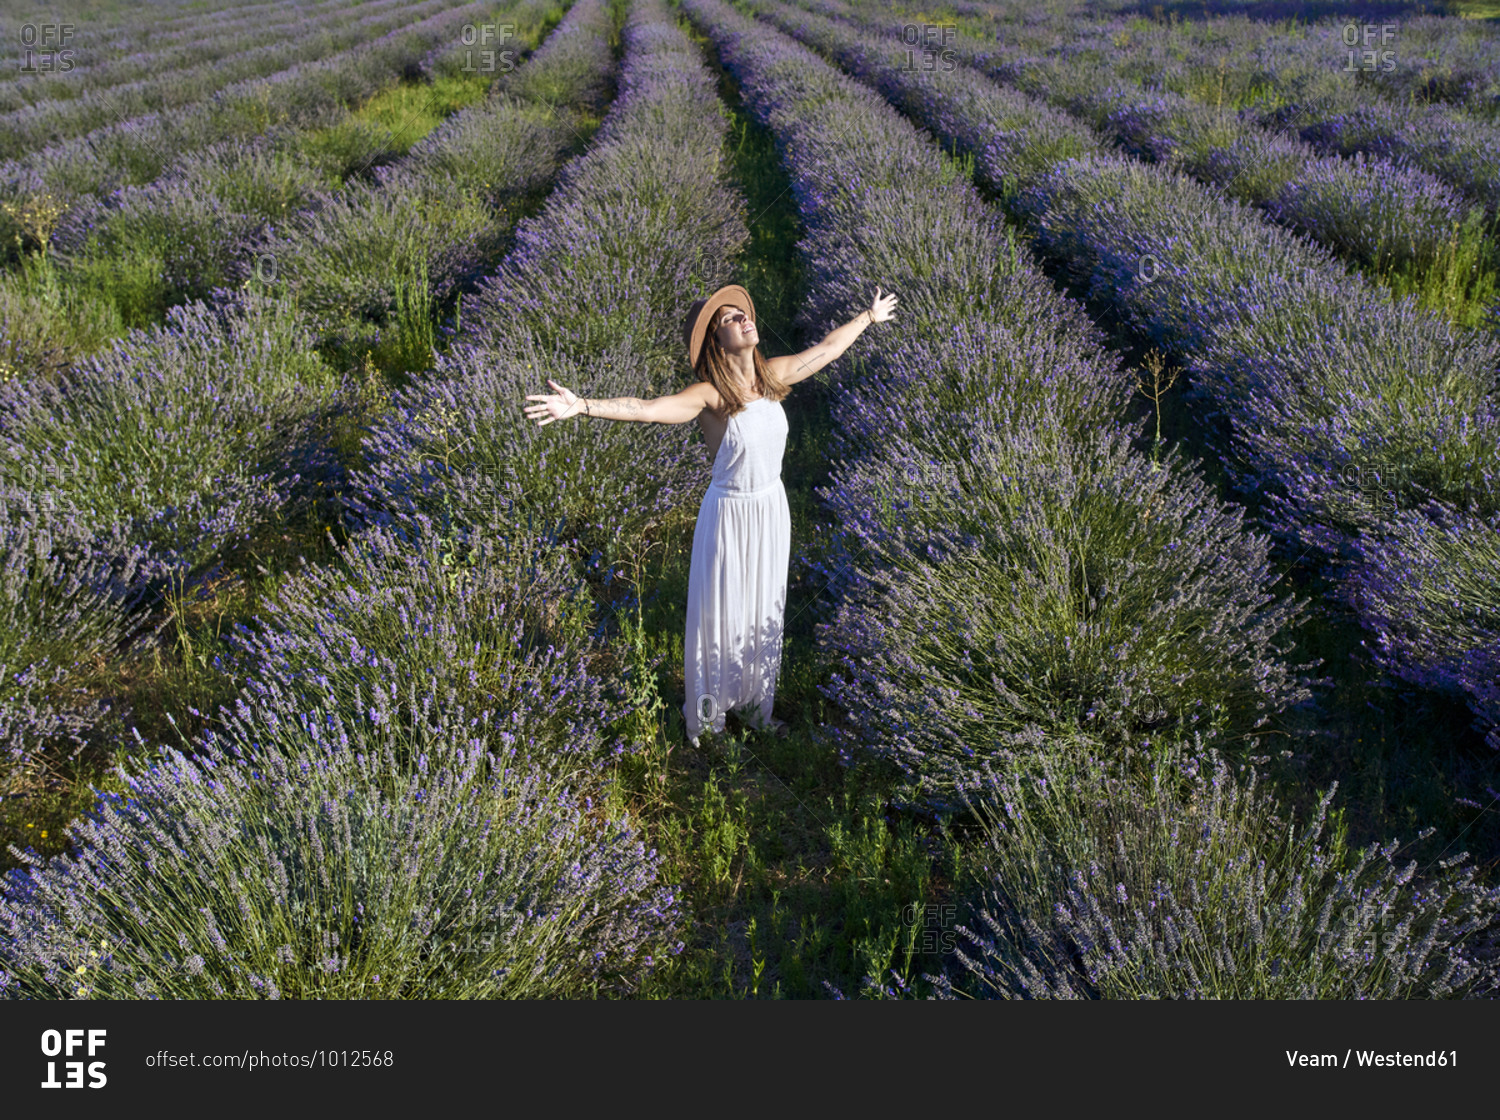 Woman wearing white dress with arms outstretched standing amidst lavender field